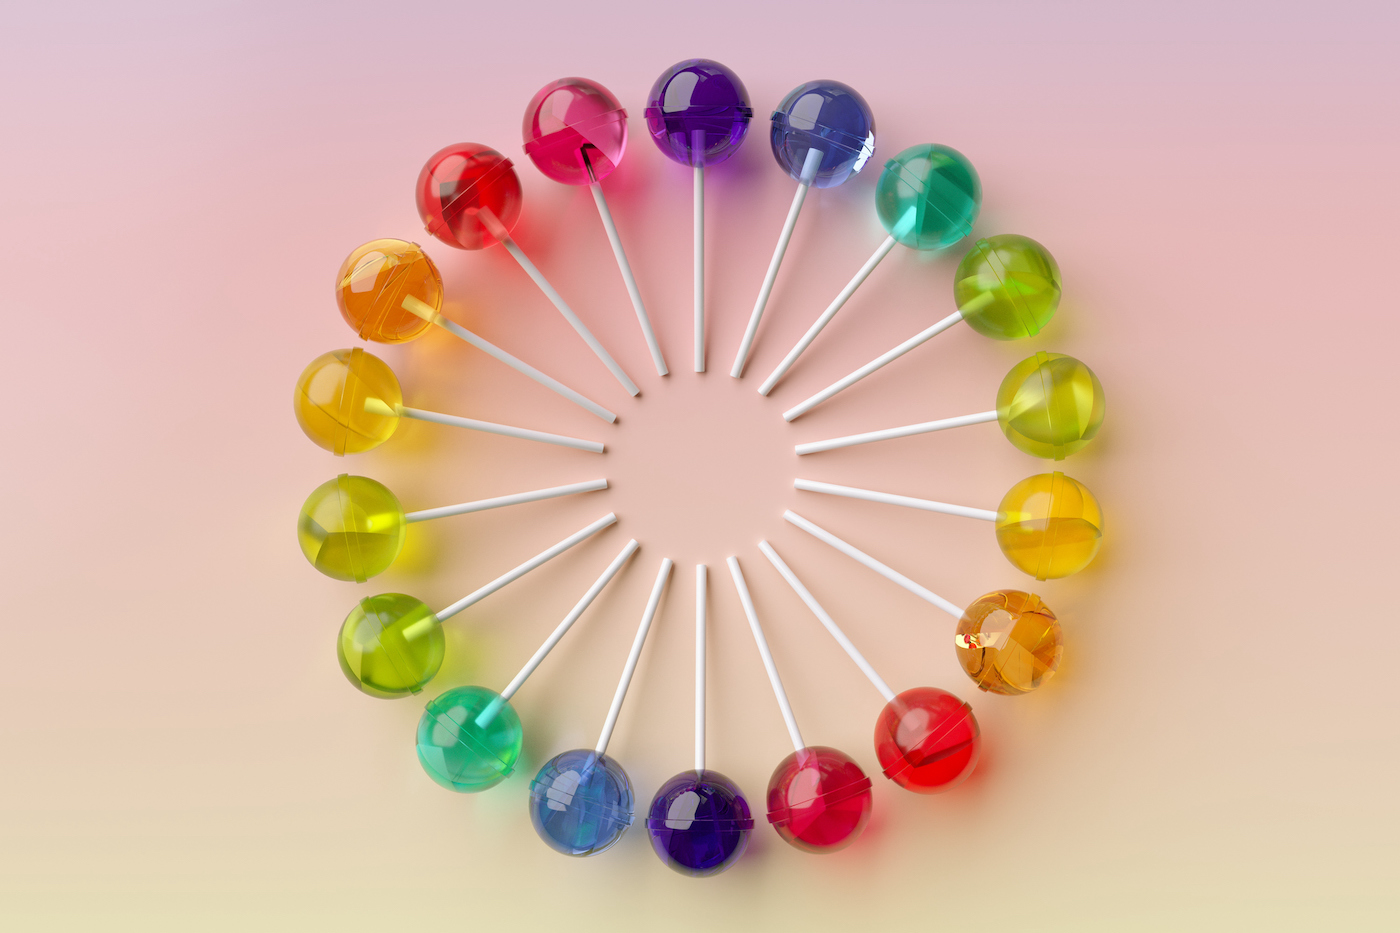 Digitally generated image of many lollipops arranged in a circular pattern on a pink surface.